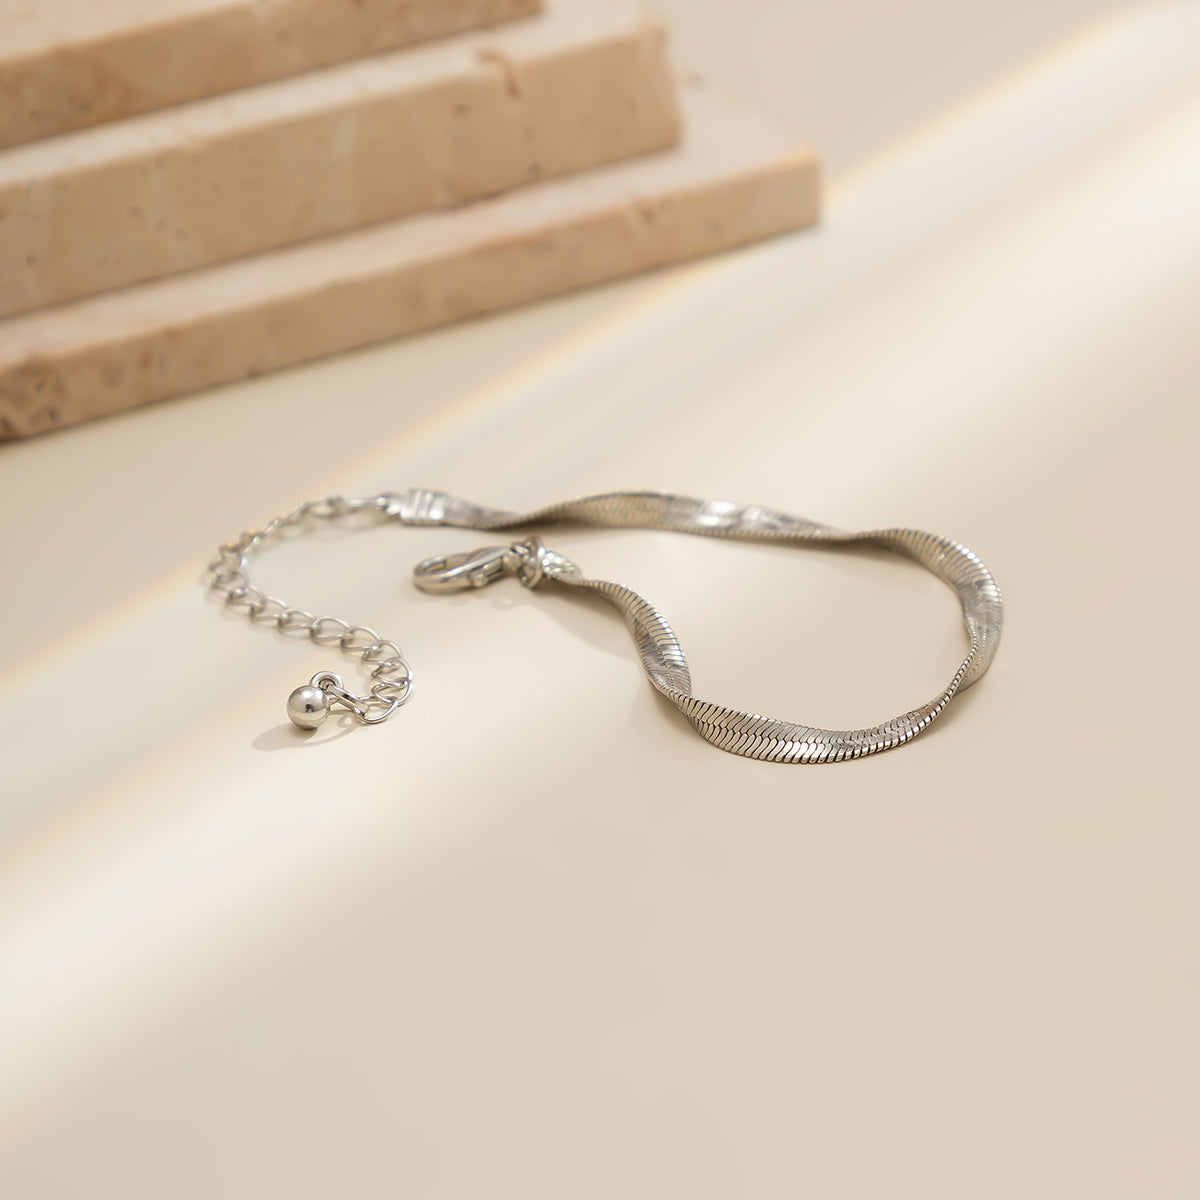 Silver-Plated Twisted Snake Chain Bracelet